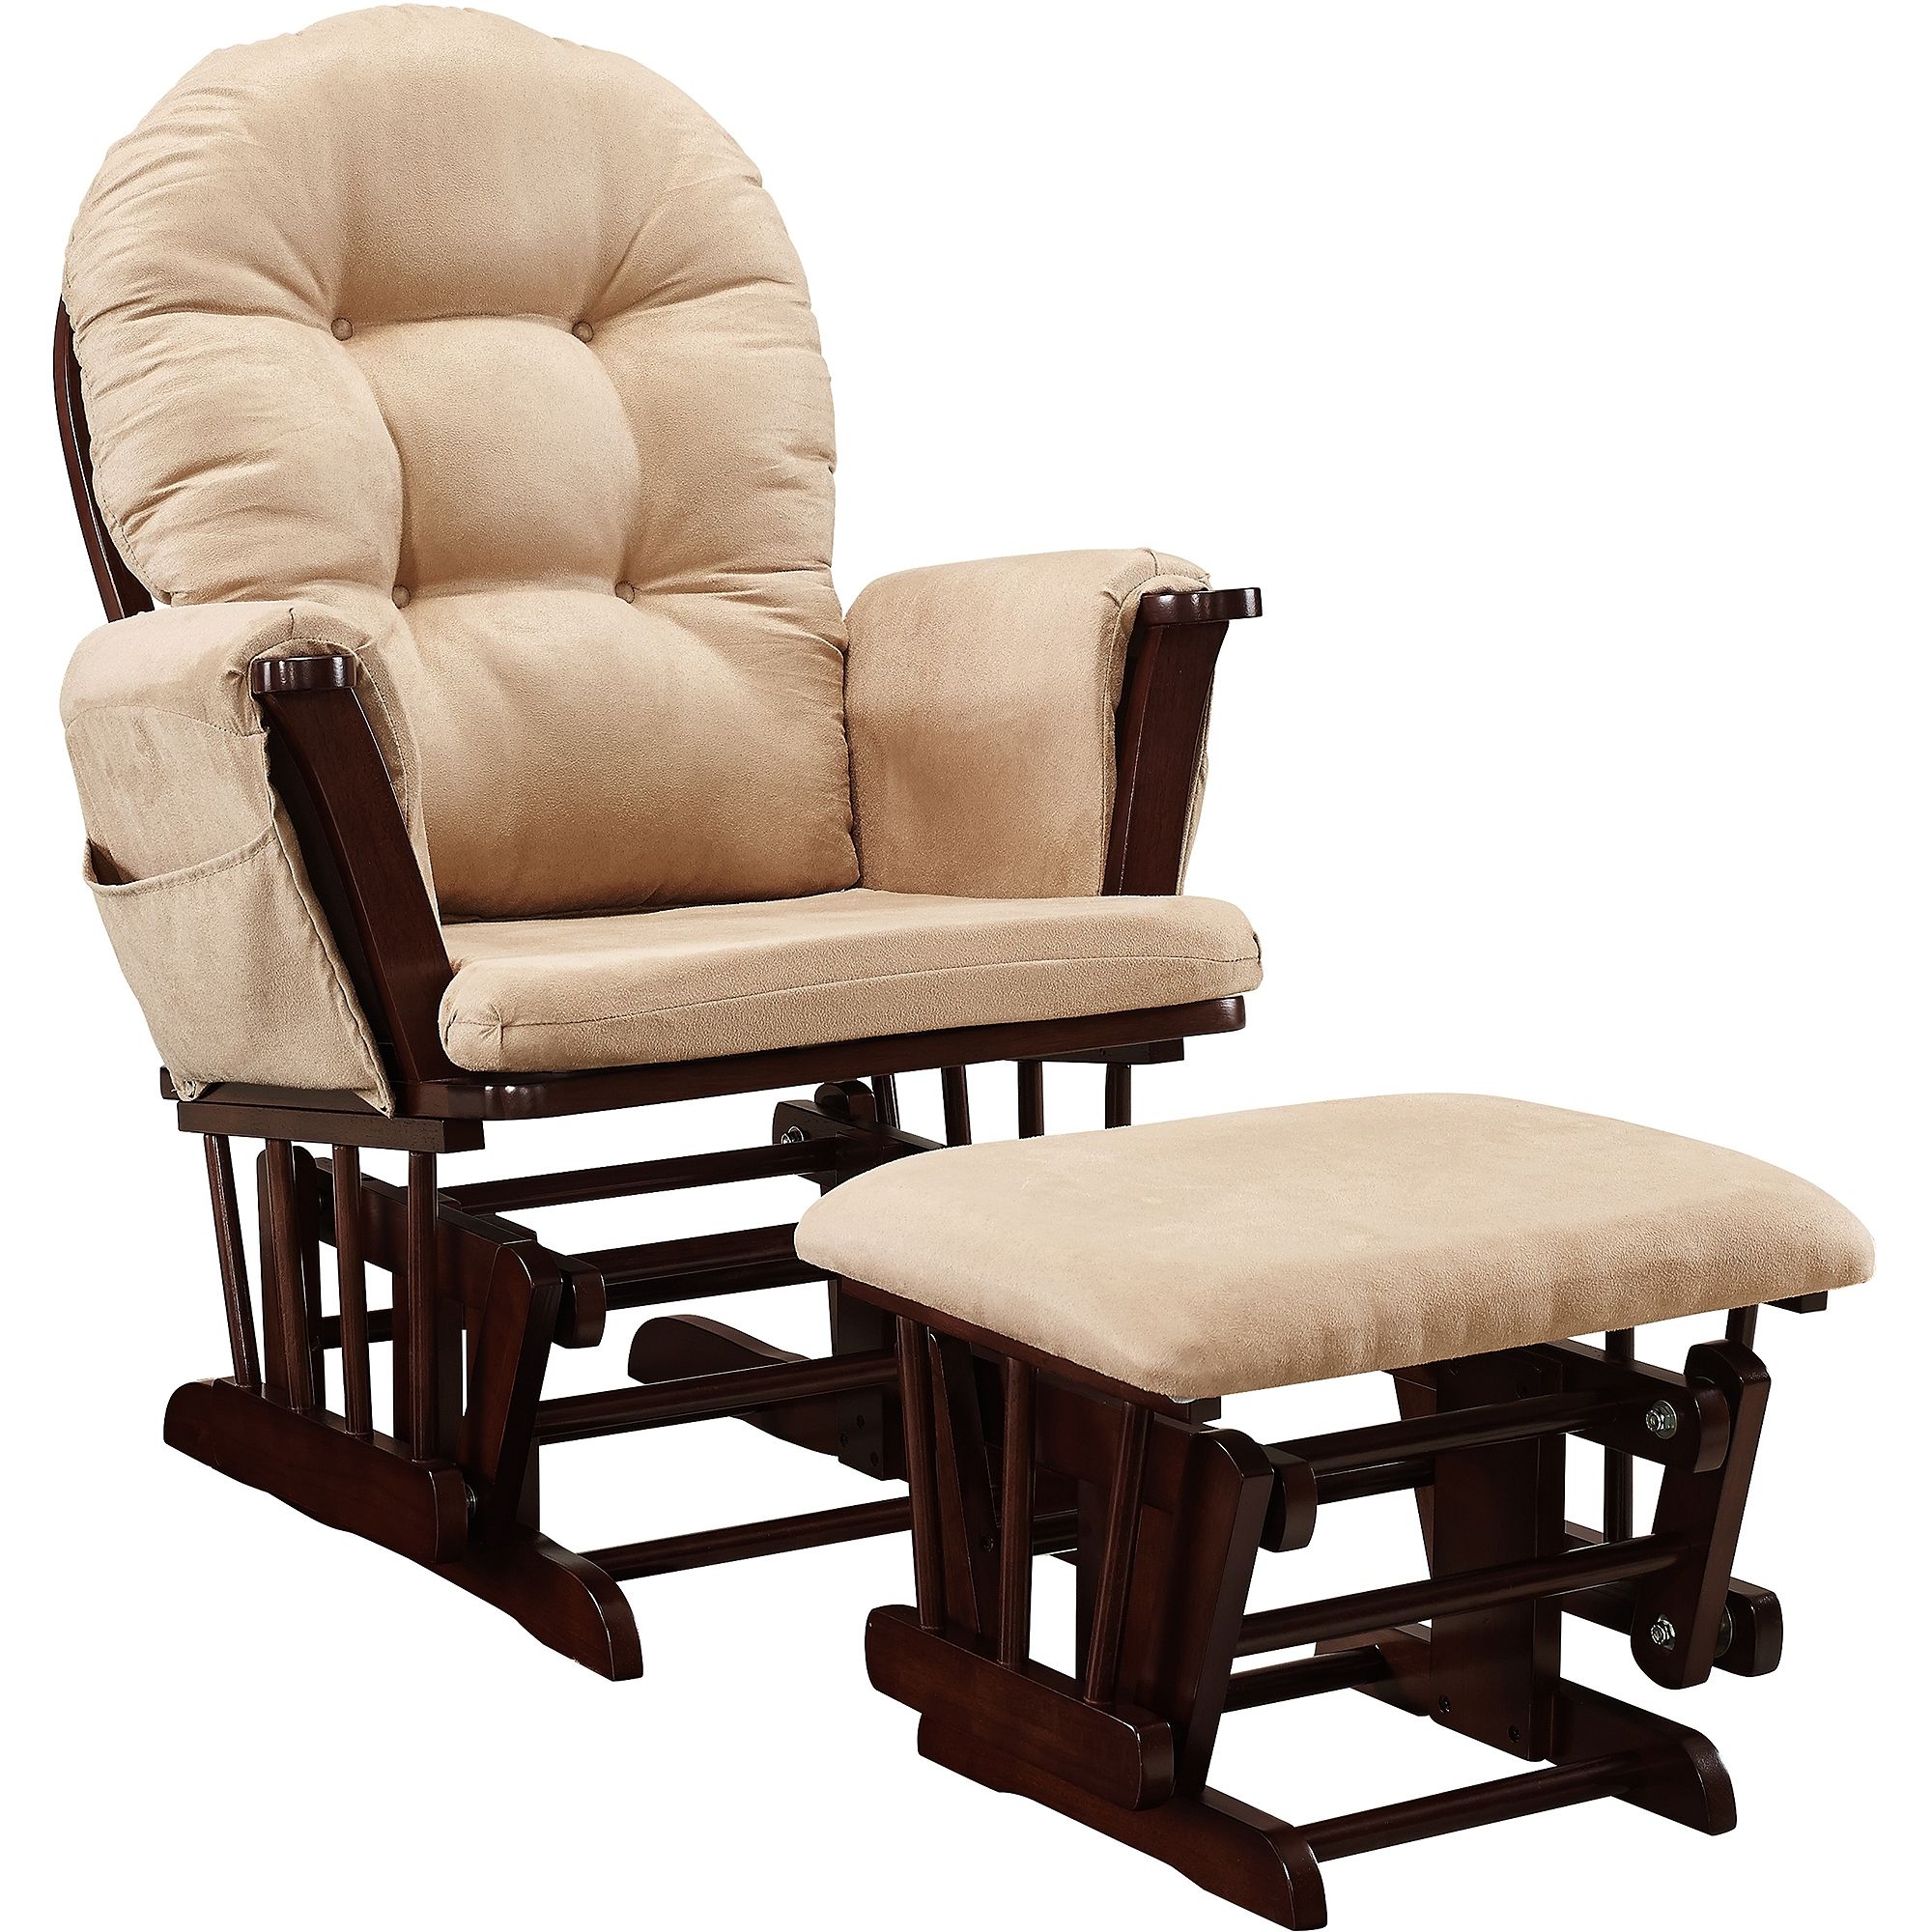 Baby Relax Harbour Glider Rocker And Ottoman Espresso With Beige Within Gliders With Ottoman (View 5 of 15)